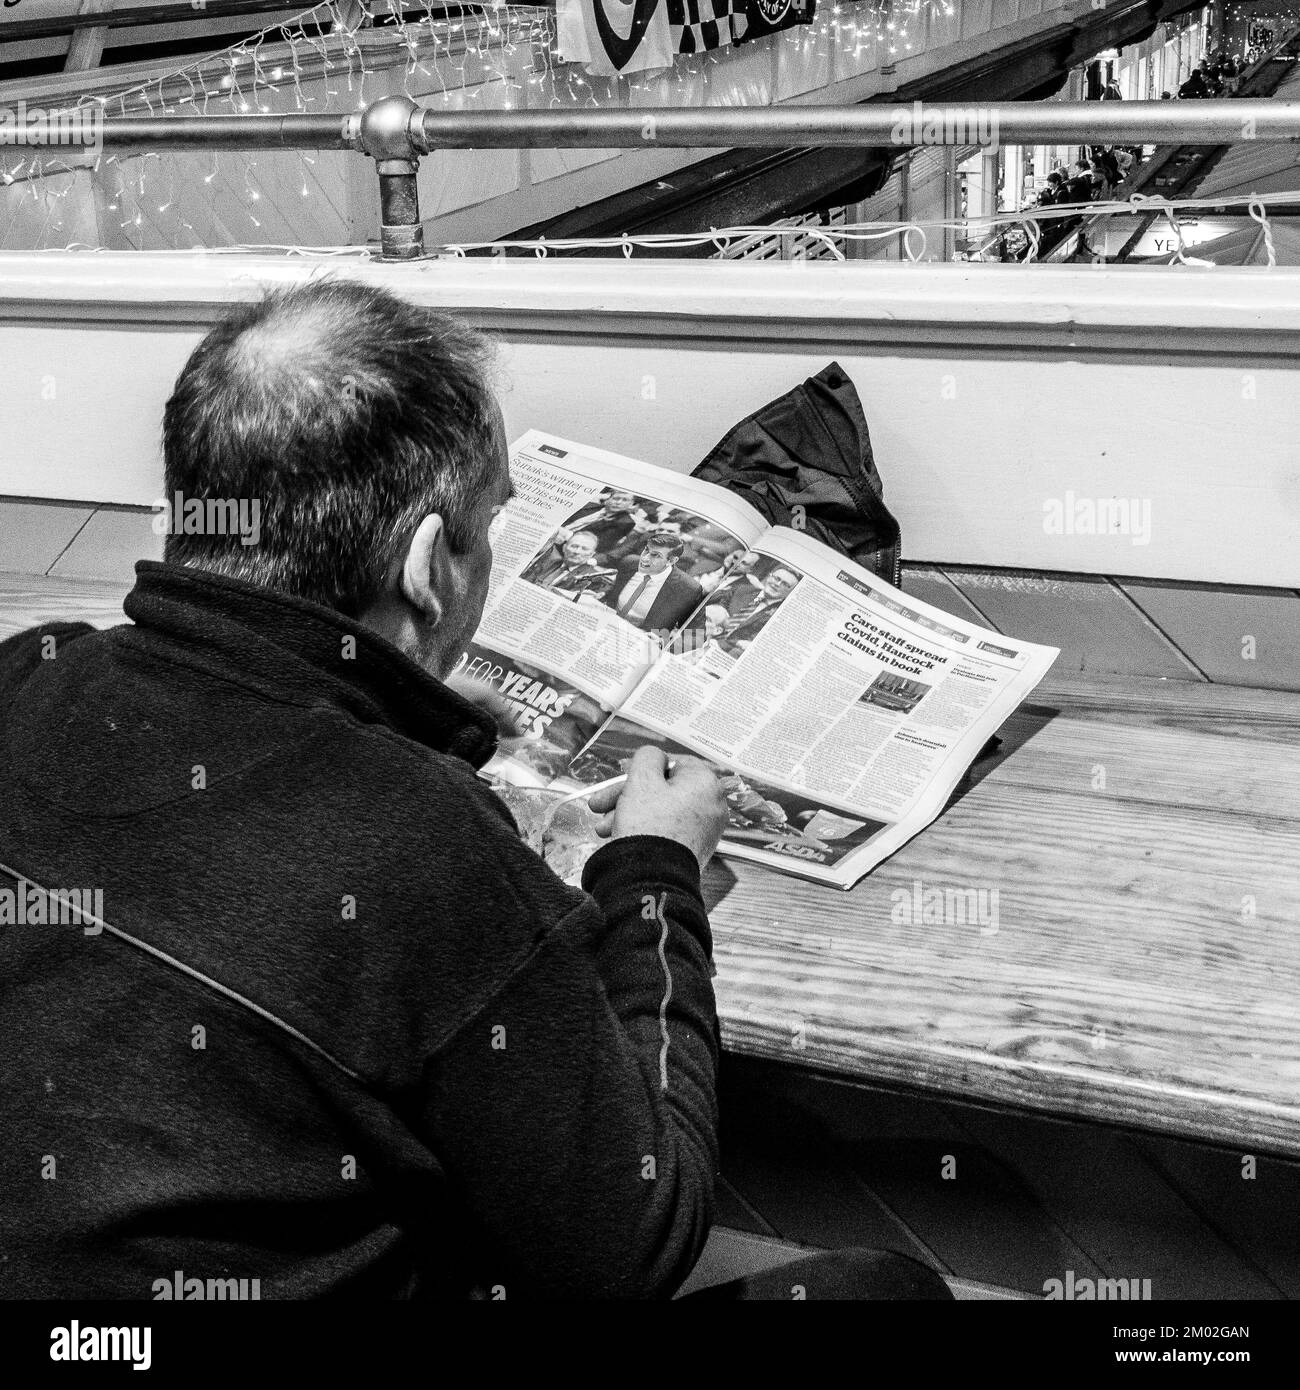 Man reading a newspaper whilst eating a bowl of soup in Cardiff Indoor Market. Clear shot of the article on PM Sunak. Black and White photograph Stock Photo